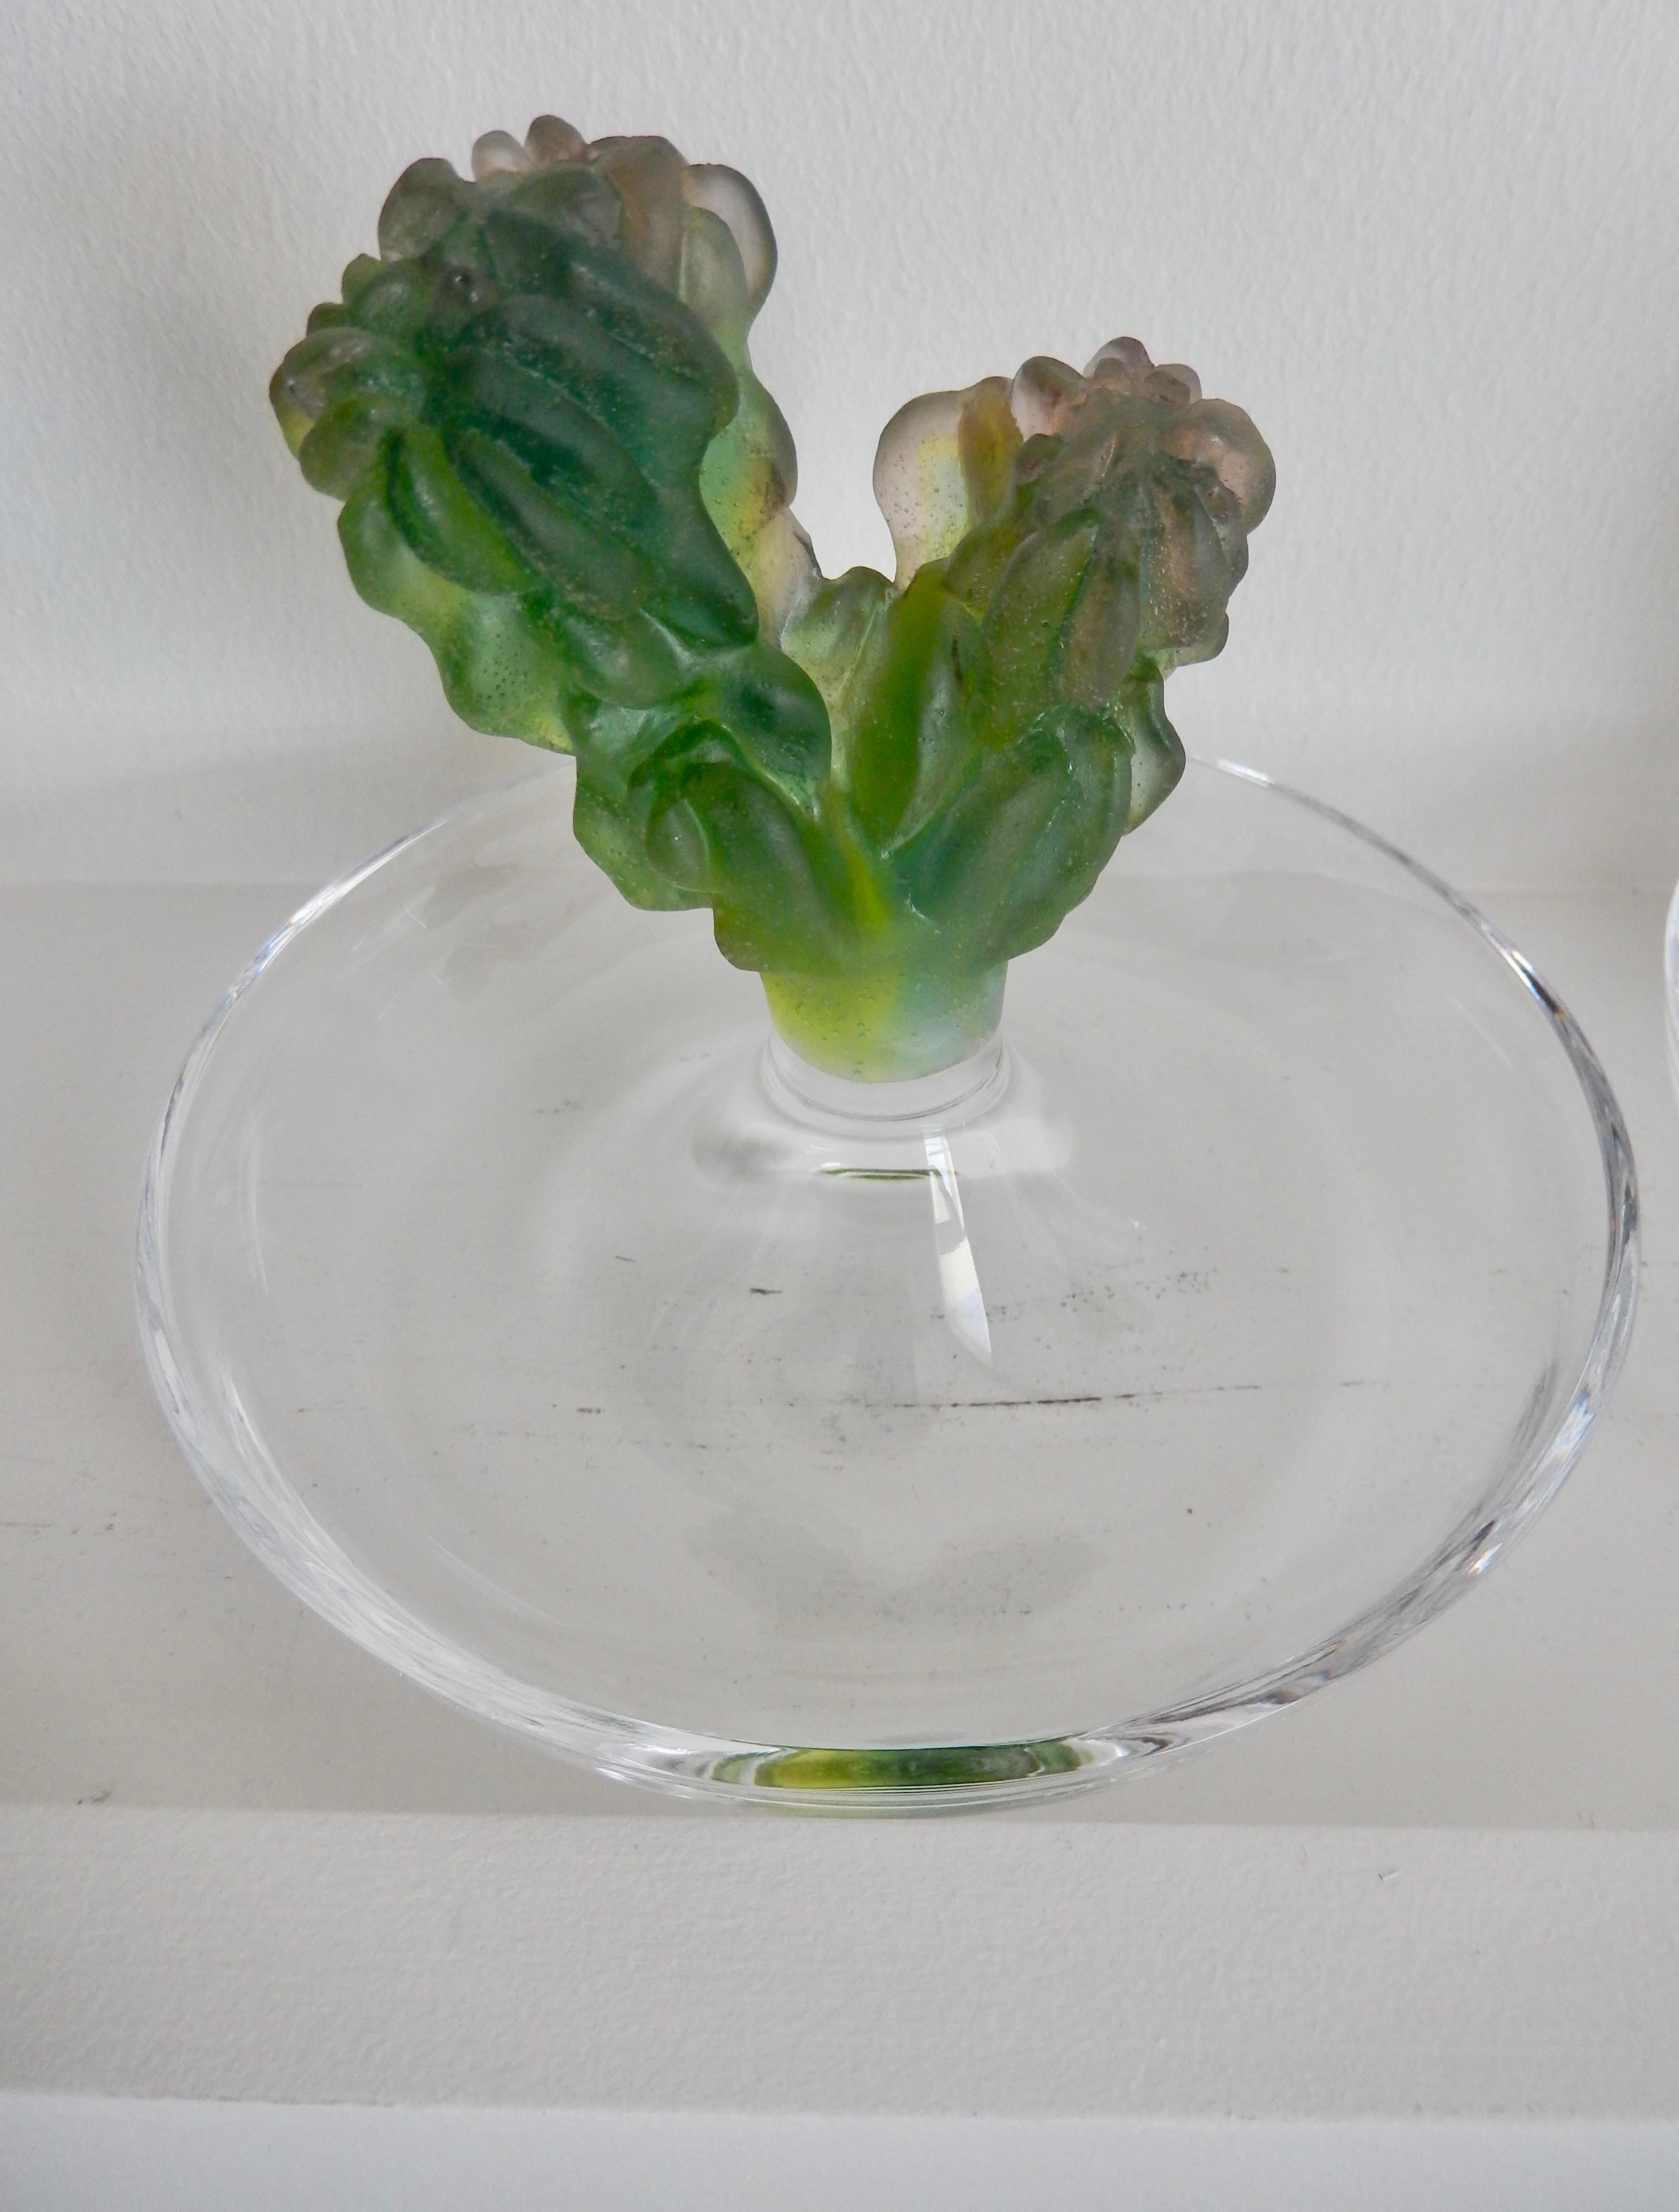 French 1980s Pair of Daum Pate de Verre Cactus Dishes by Hilton McConnico For Sale